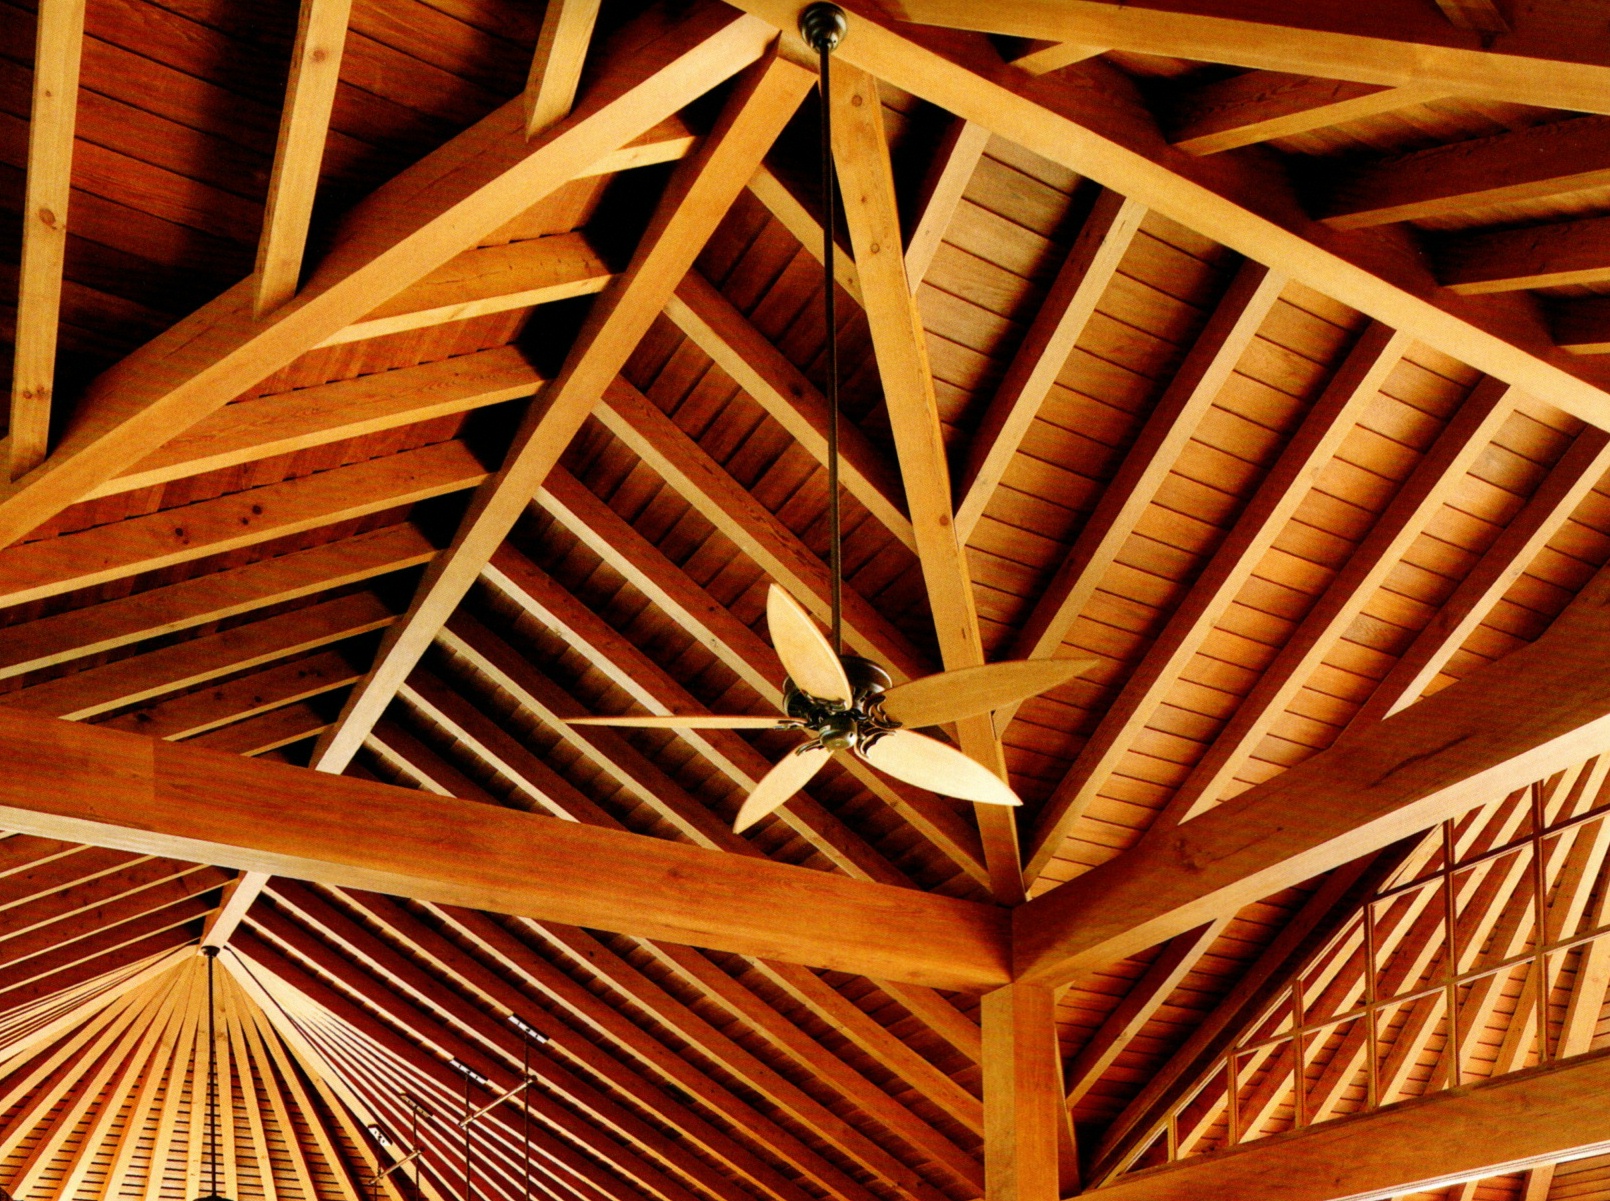 Fire Retardant for wood ceiling rafters